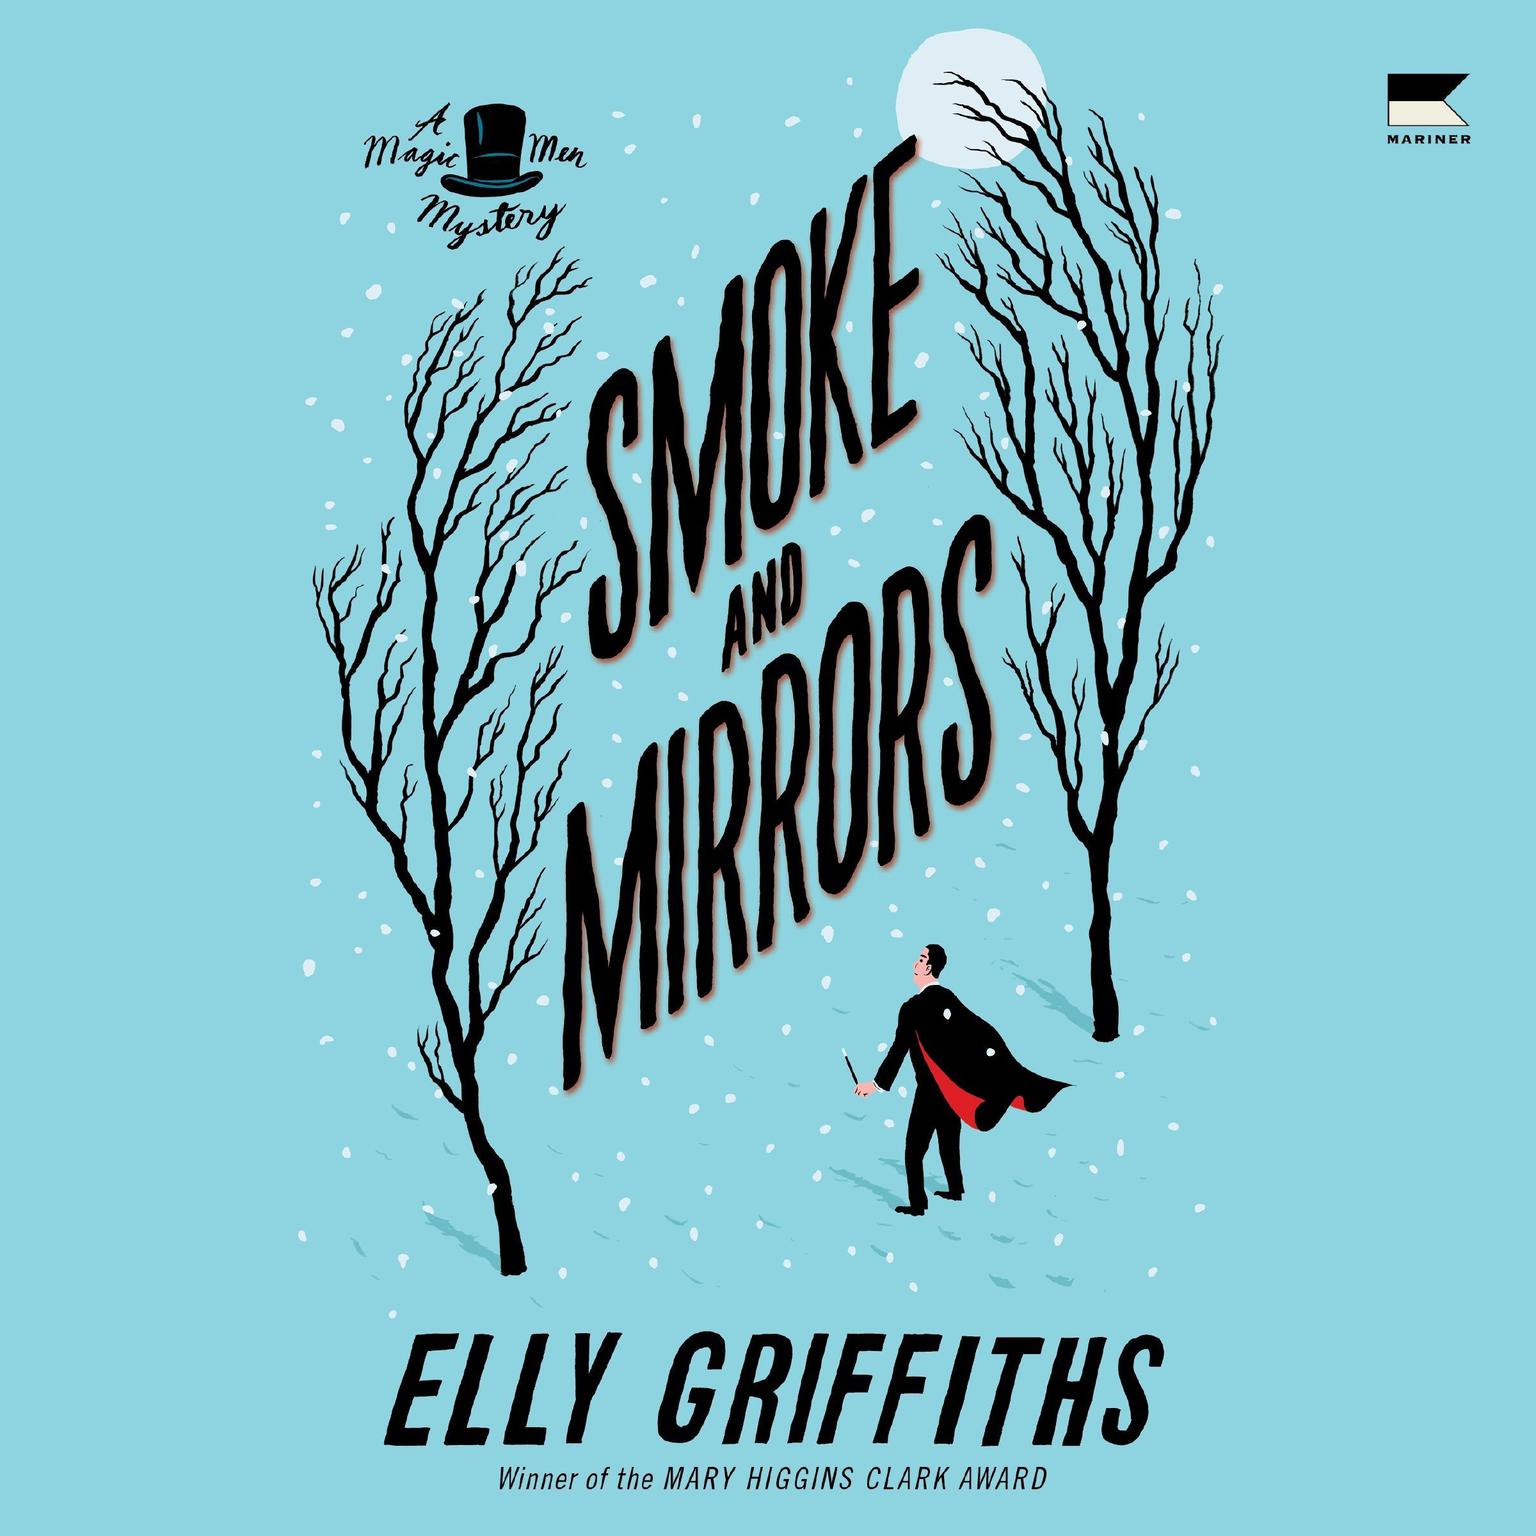 Smoke and Mirrors Audiobook, by Elly Griffiths